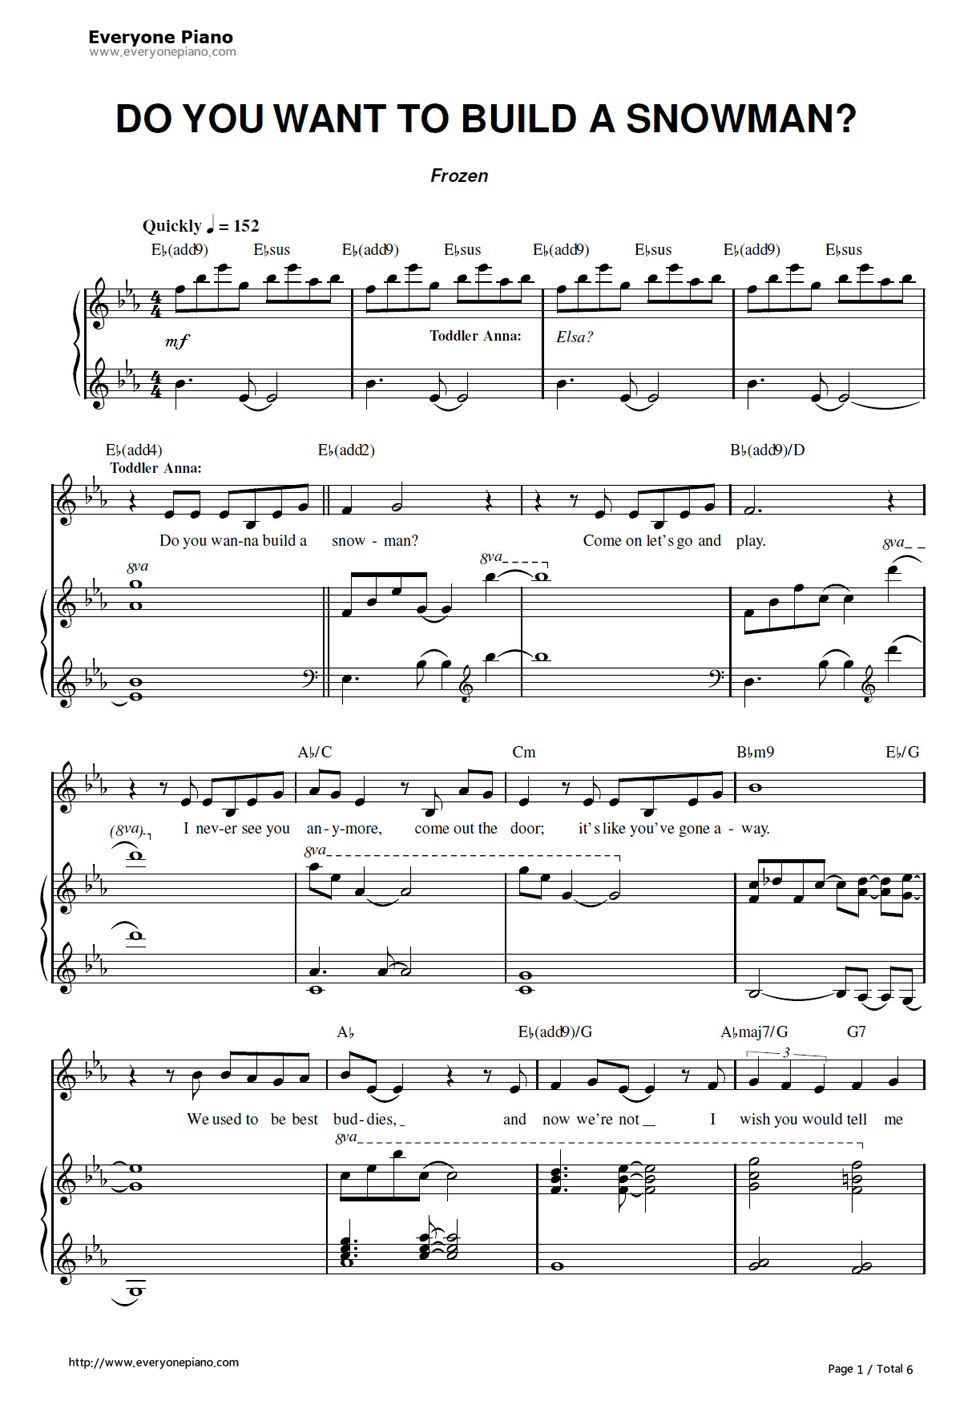 Free Do You Want To Build A Snowman-Frozen Ost Sheet Music Preview 1 - Frozen Piano Sheet Music Free Printable